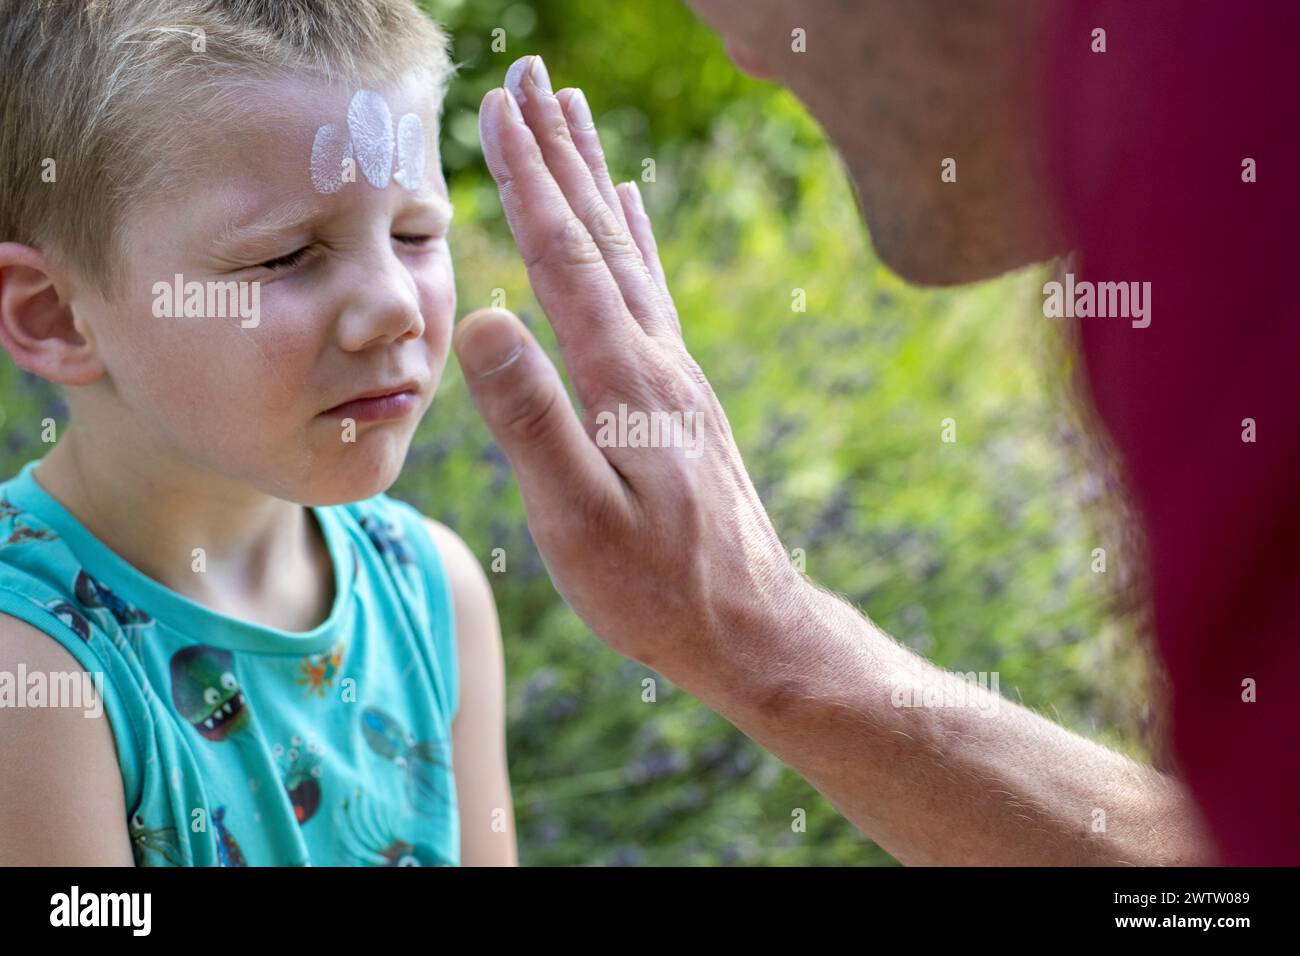 Child receiving face paint outdoors Stock Photo